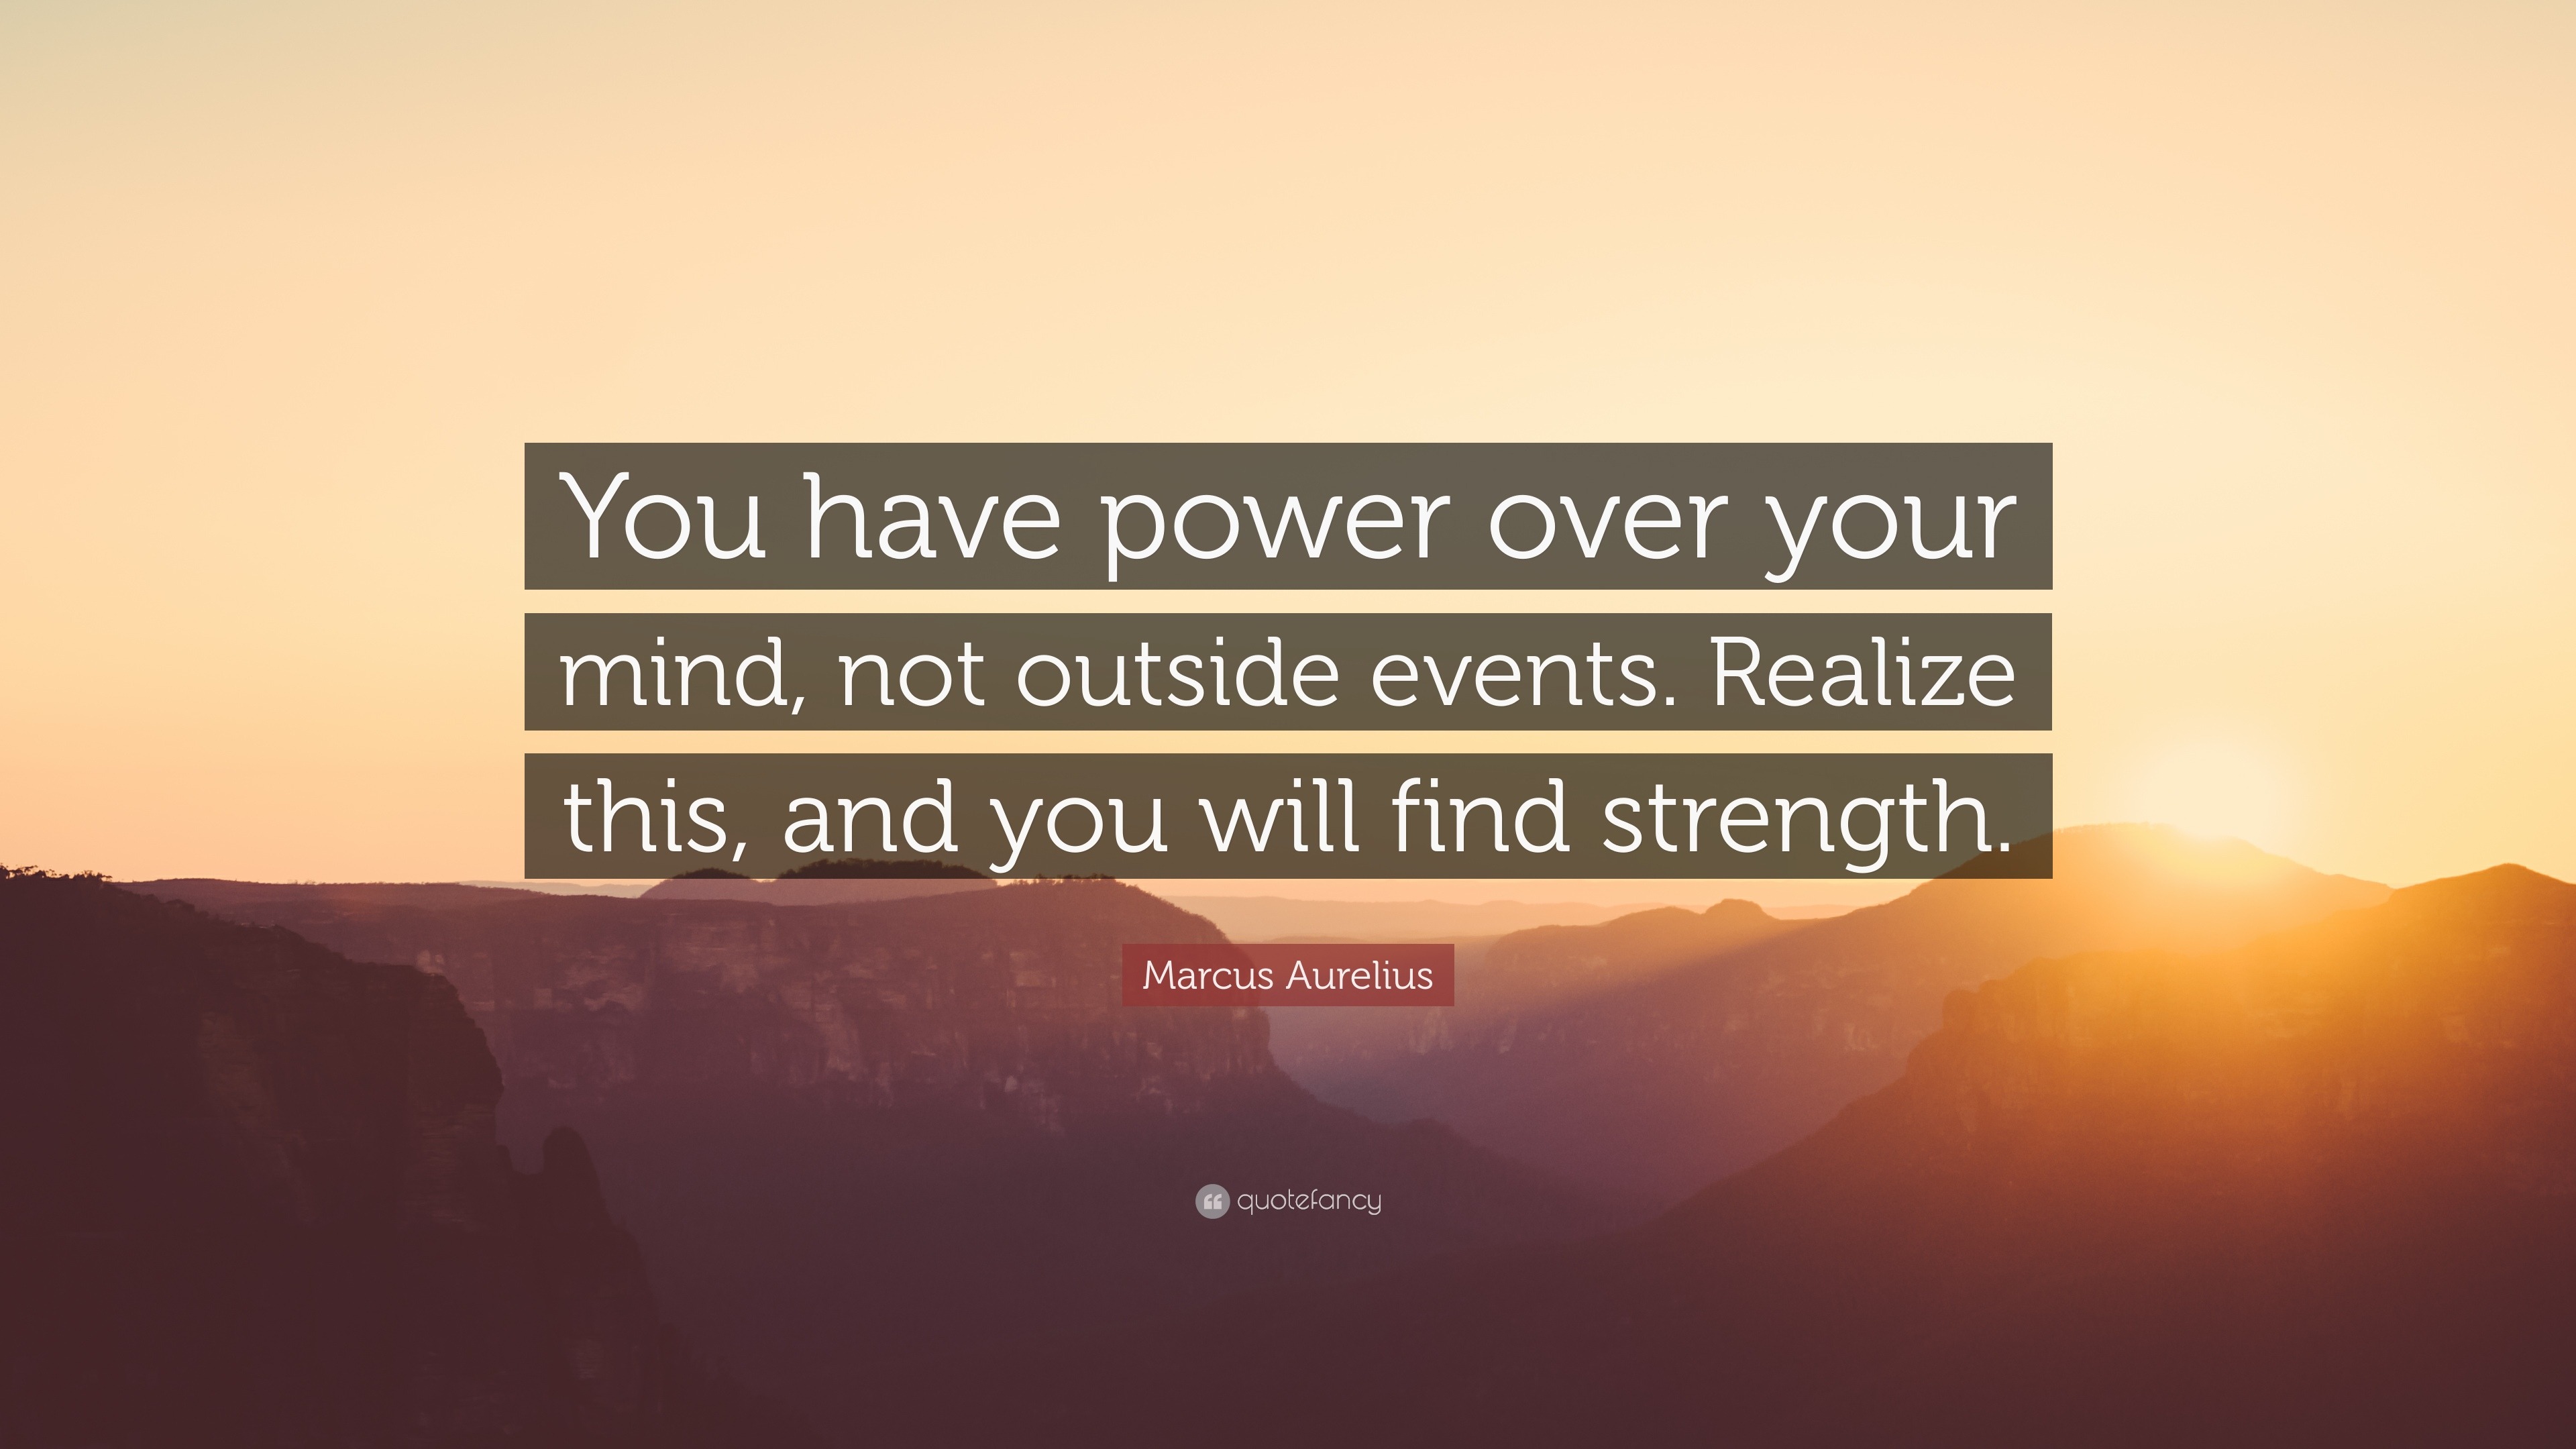 Marcus Aurelius Quote: “You have power over your mind, not outside ...